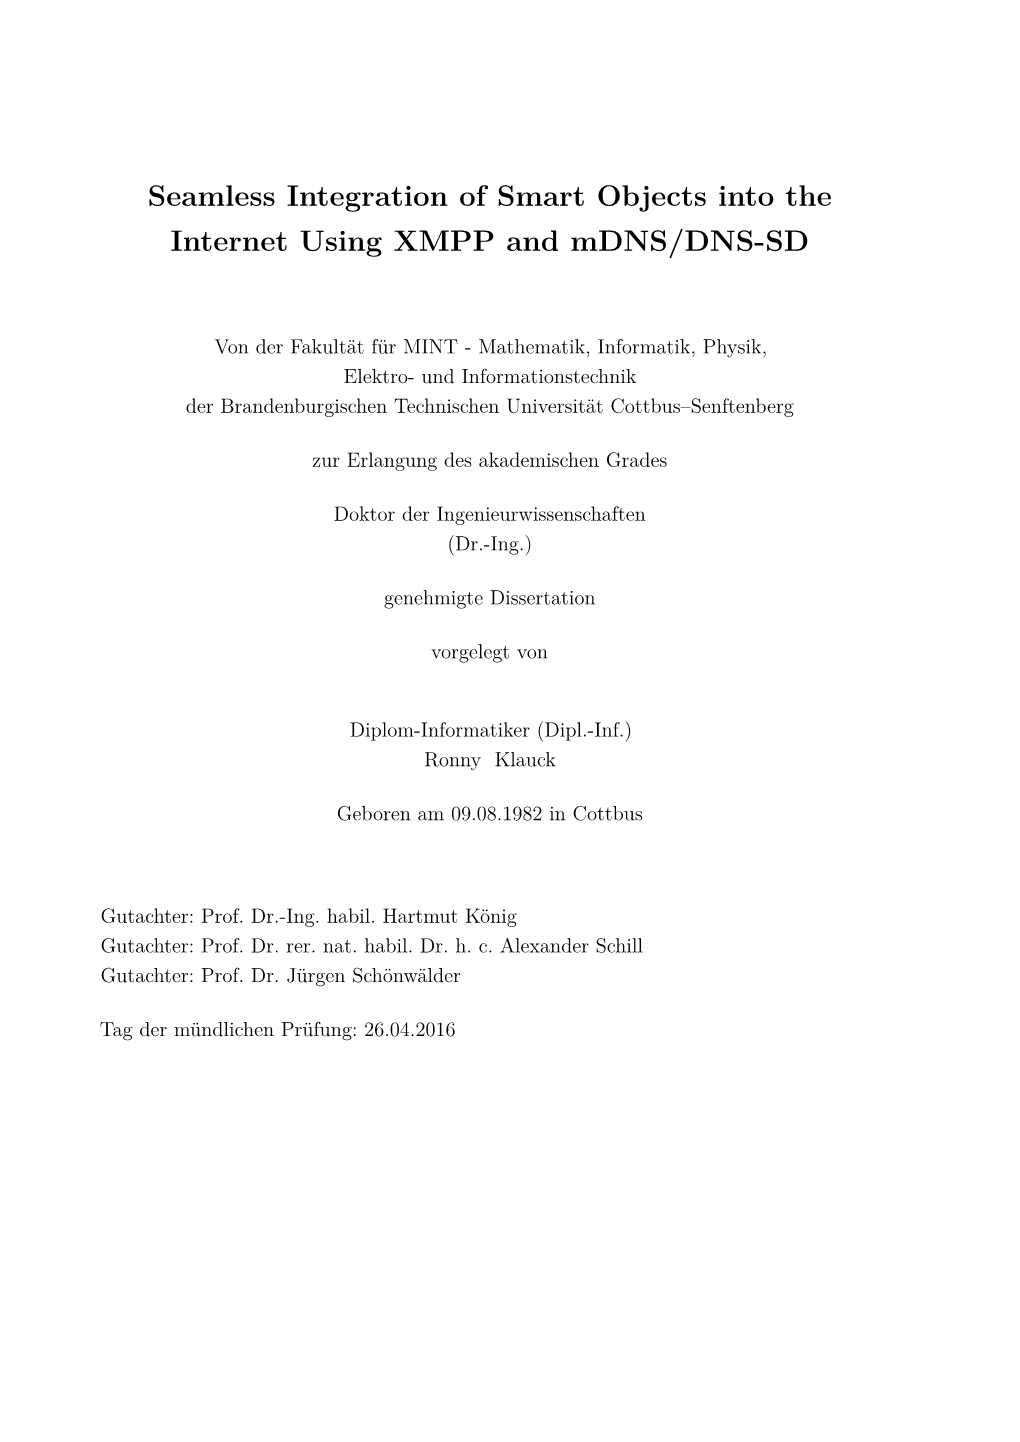 Seamless Integration of Smart Objects Into the Internet Using XMPP and Mdns/DNS-SD